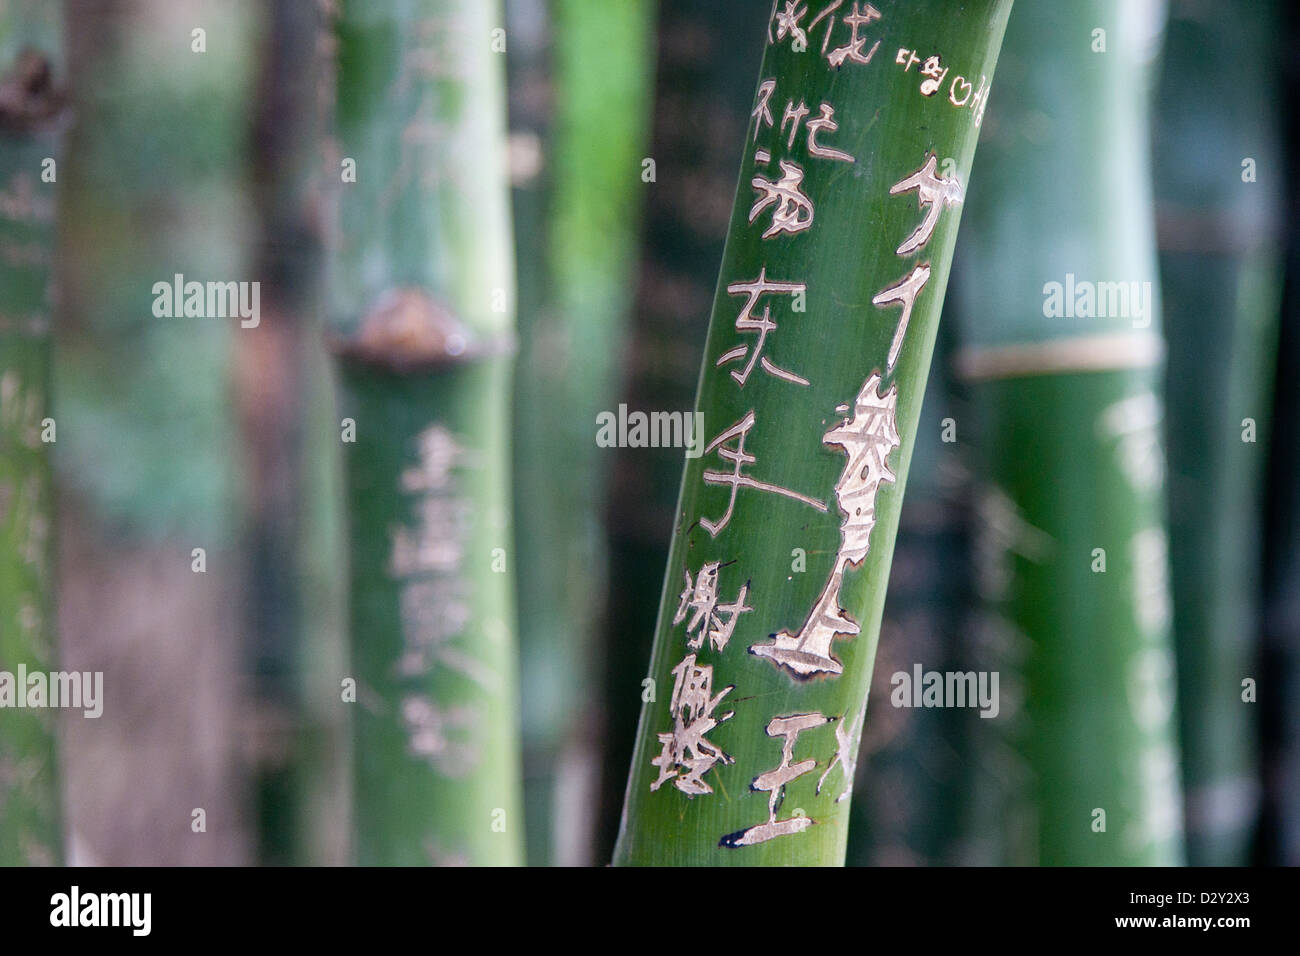 Bamboo trunks with engravings on. Stock Photo